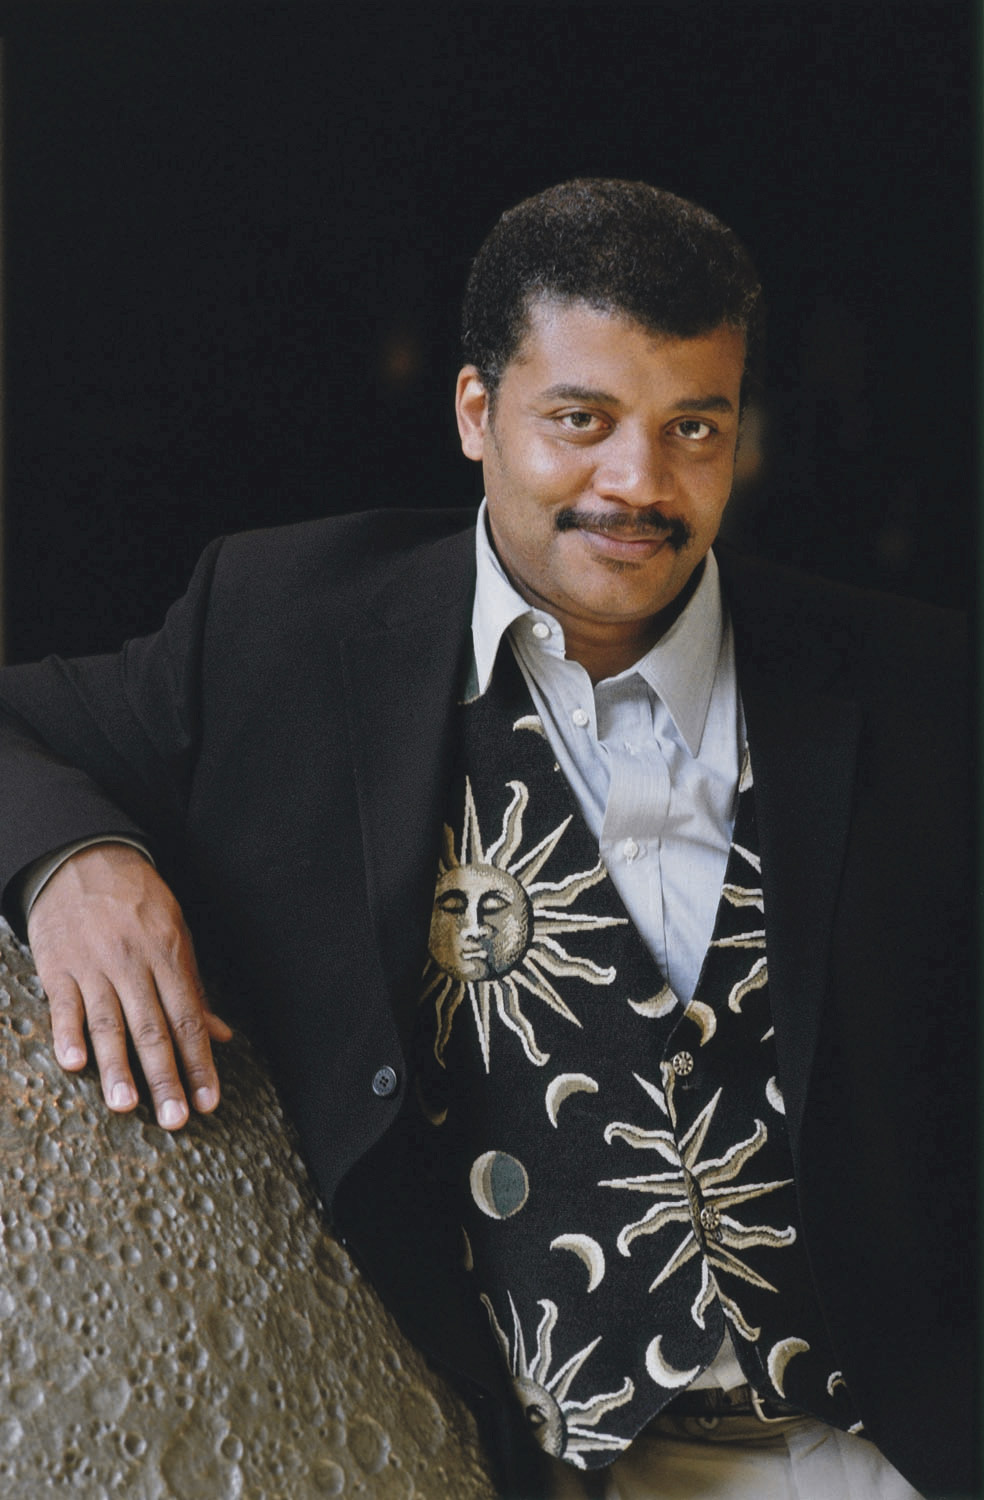 Neil deGrasse Tyson looking into the camera while leaning on the large, three-dimansional model of the Moon.